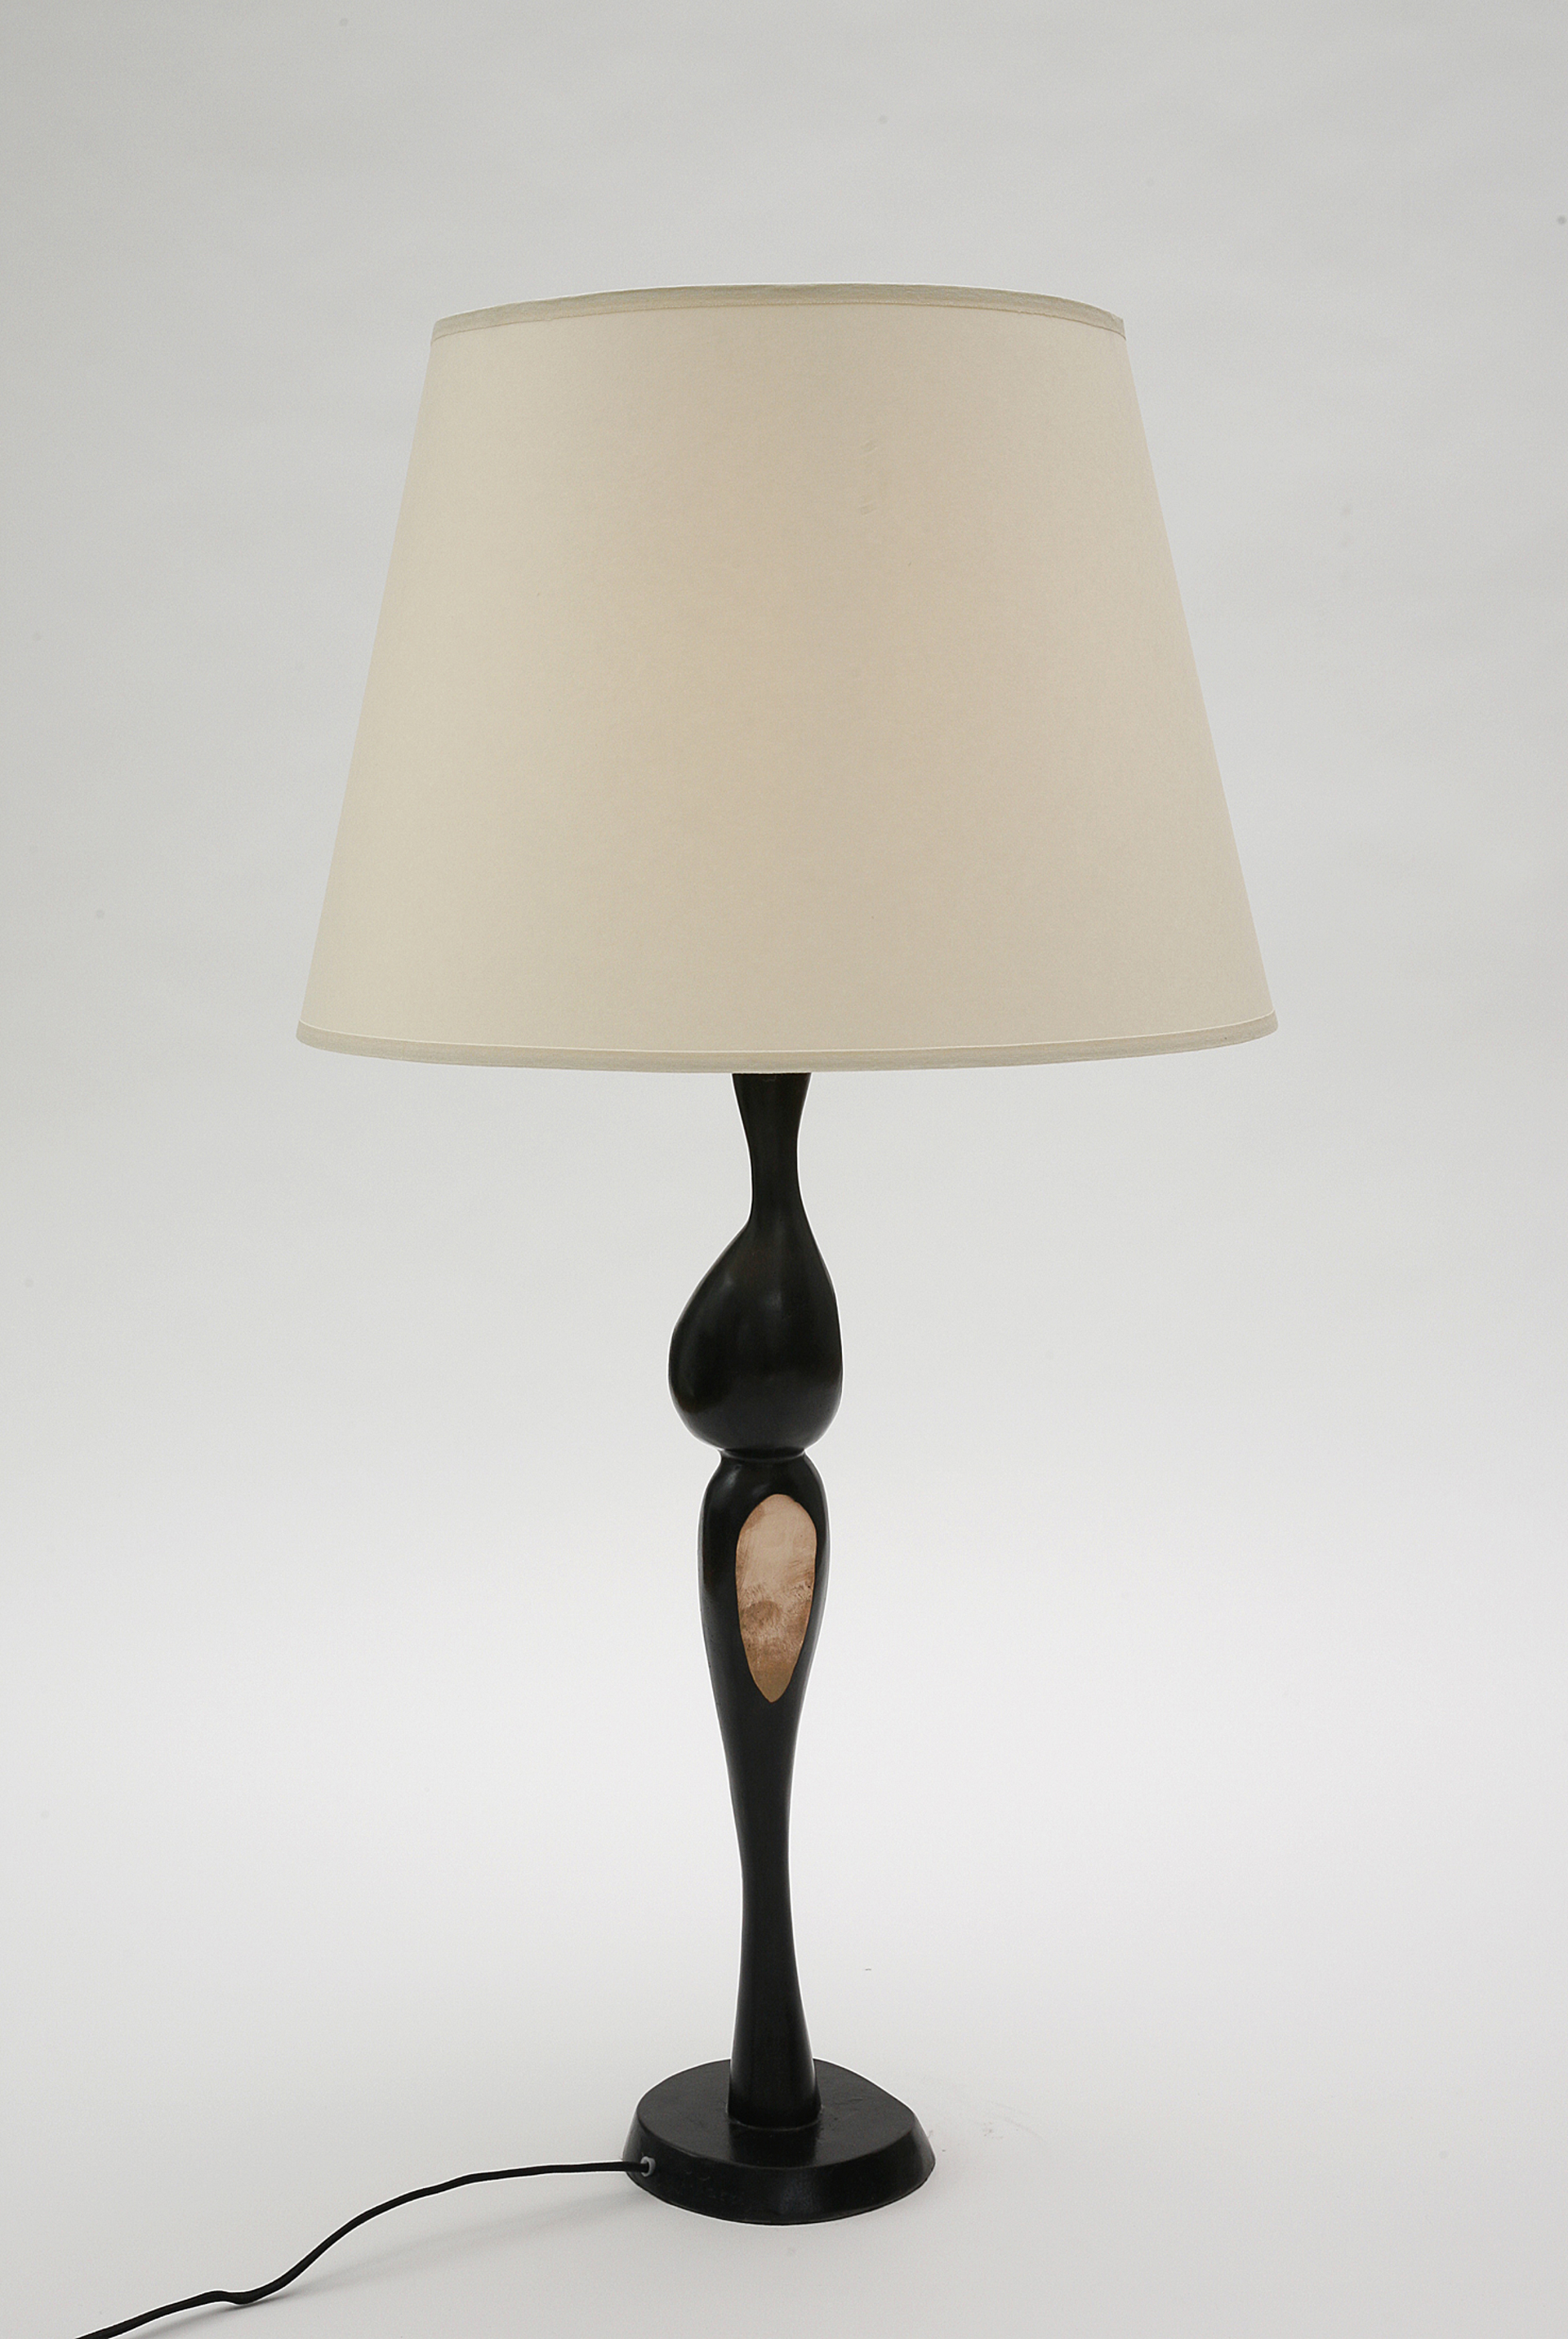 "Lola" Lamp by Jacques Jarrige